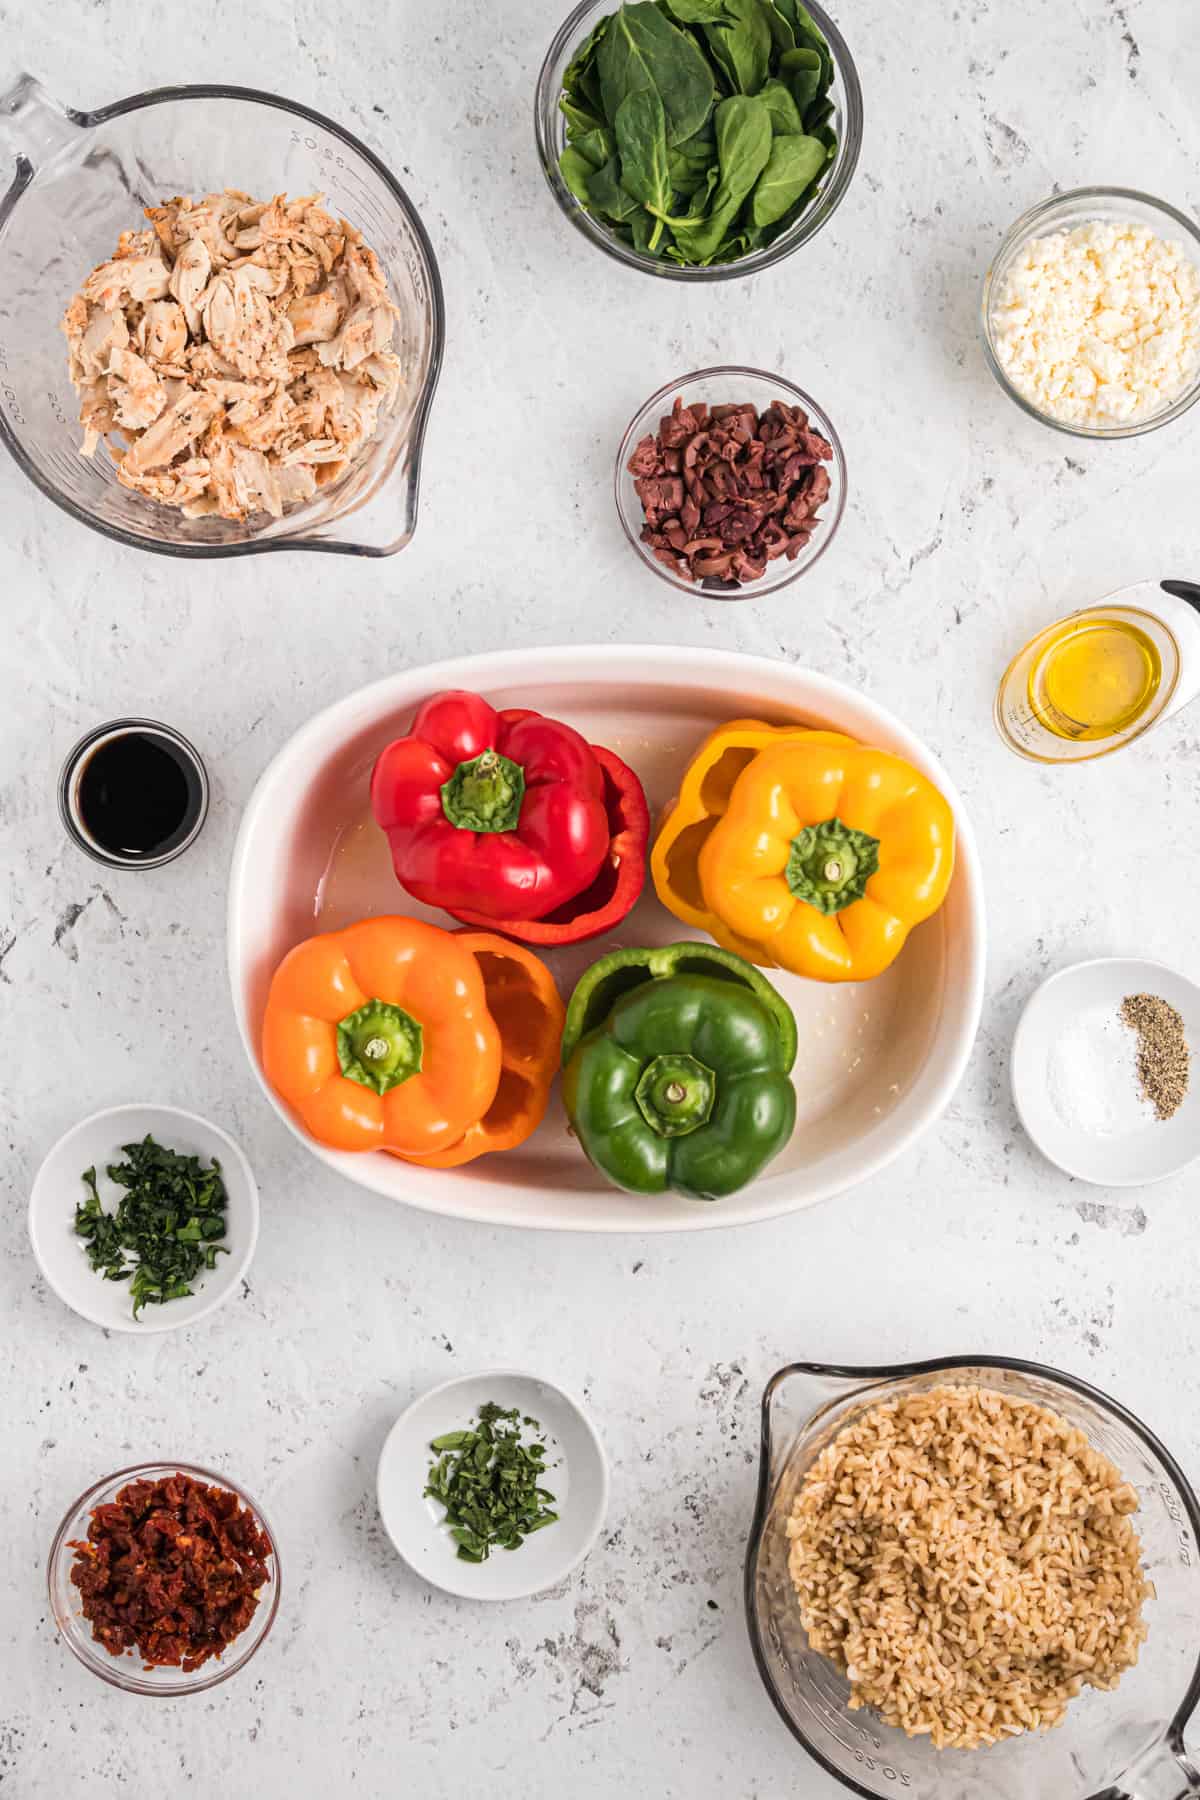 The ingredients for stuffed bell peppers are spread out across a white countertop.